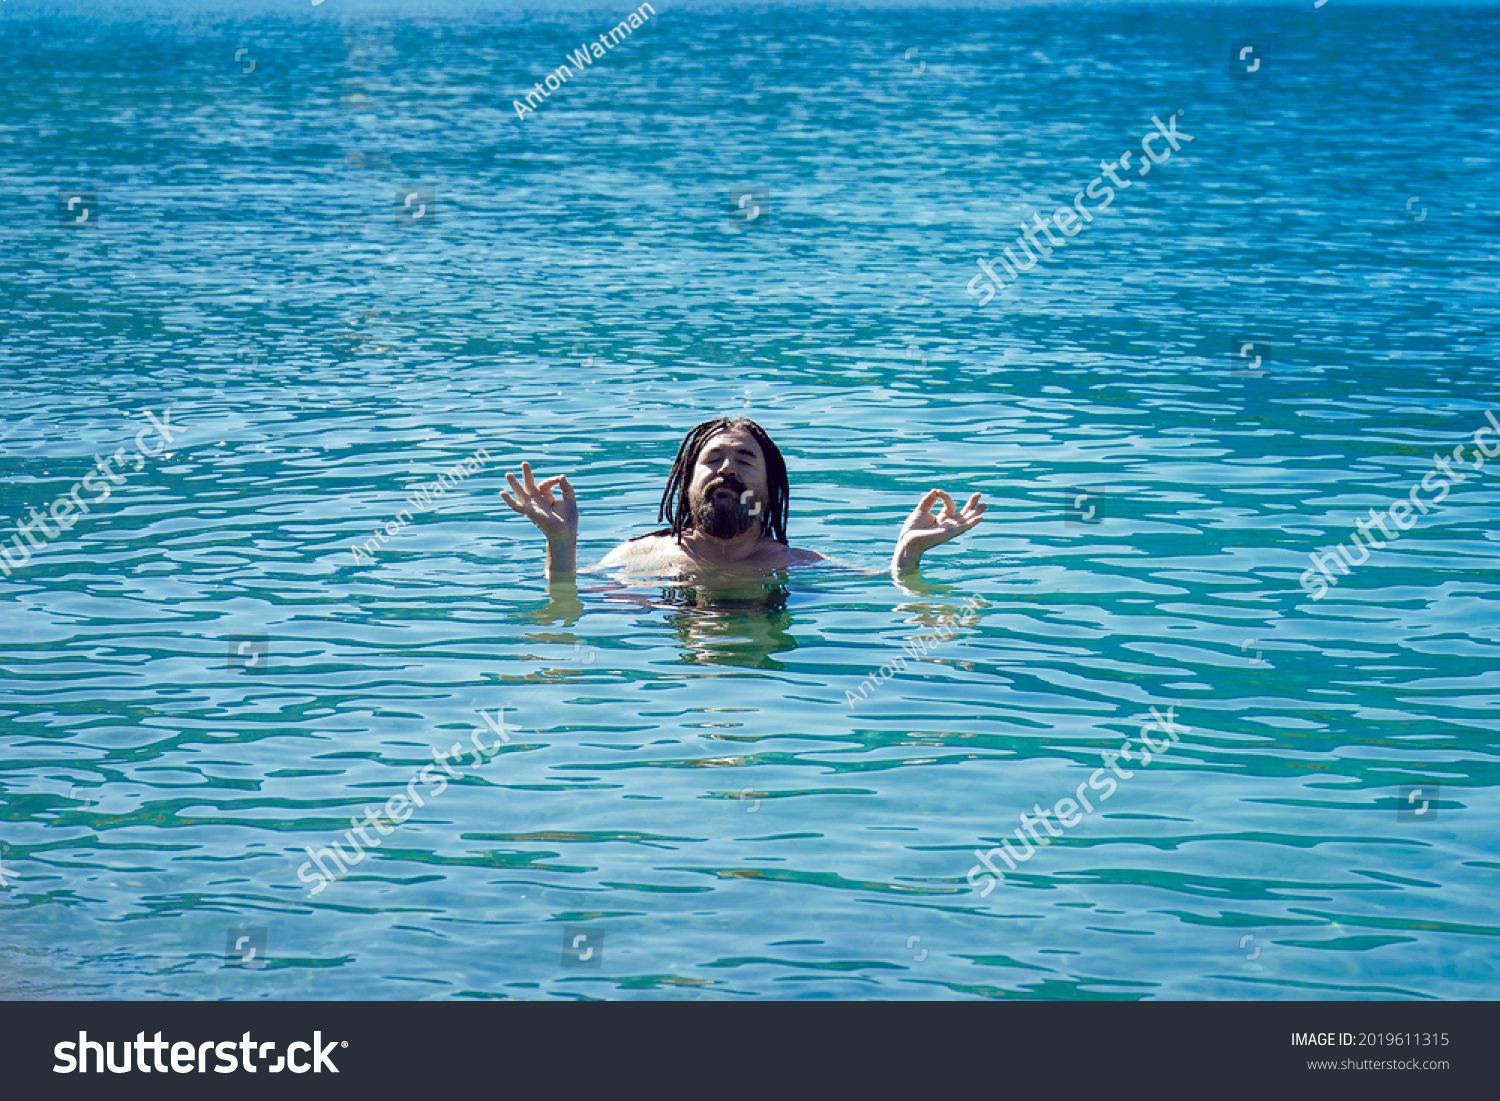 A man with dreadlocks in a relaxed Om position in turquoise water. Relaxation and enlightenment. #2019611315